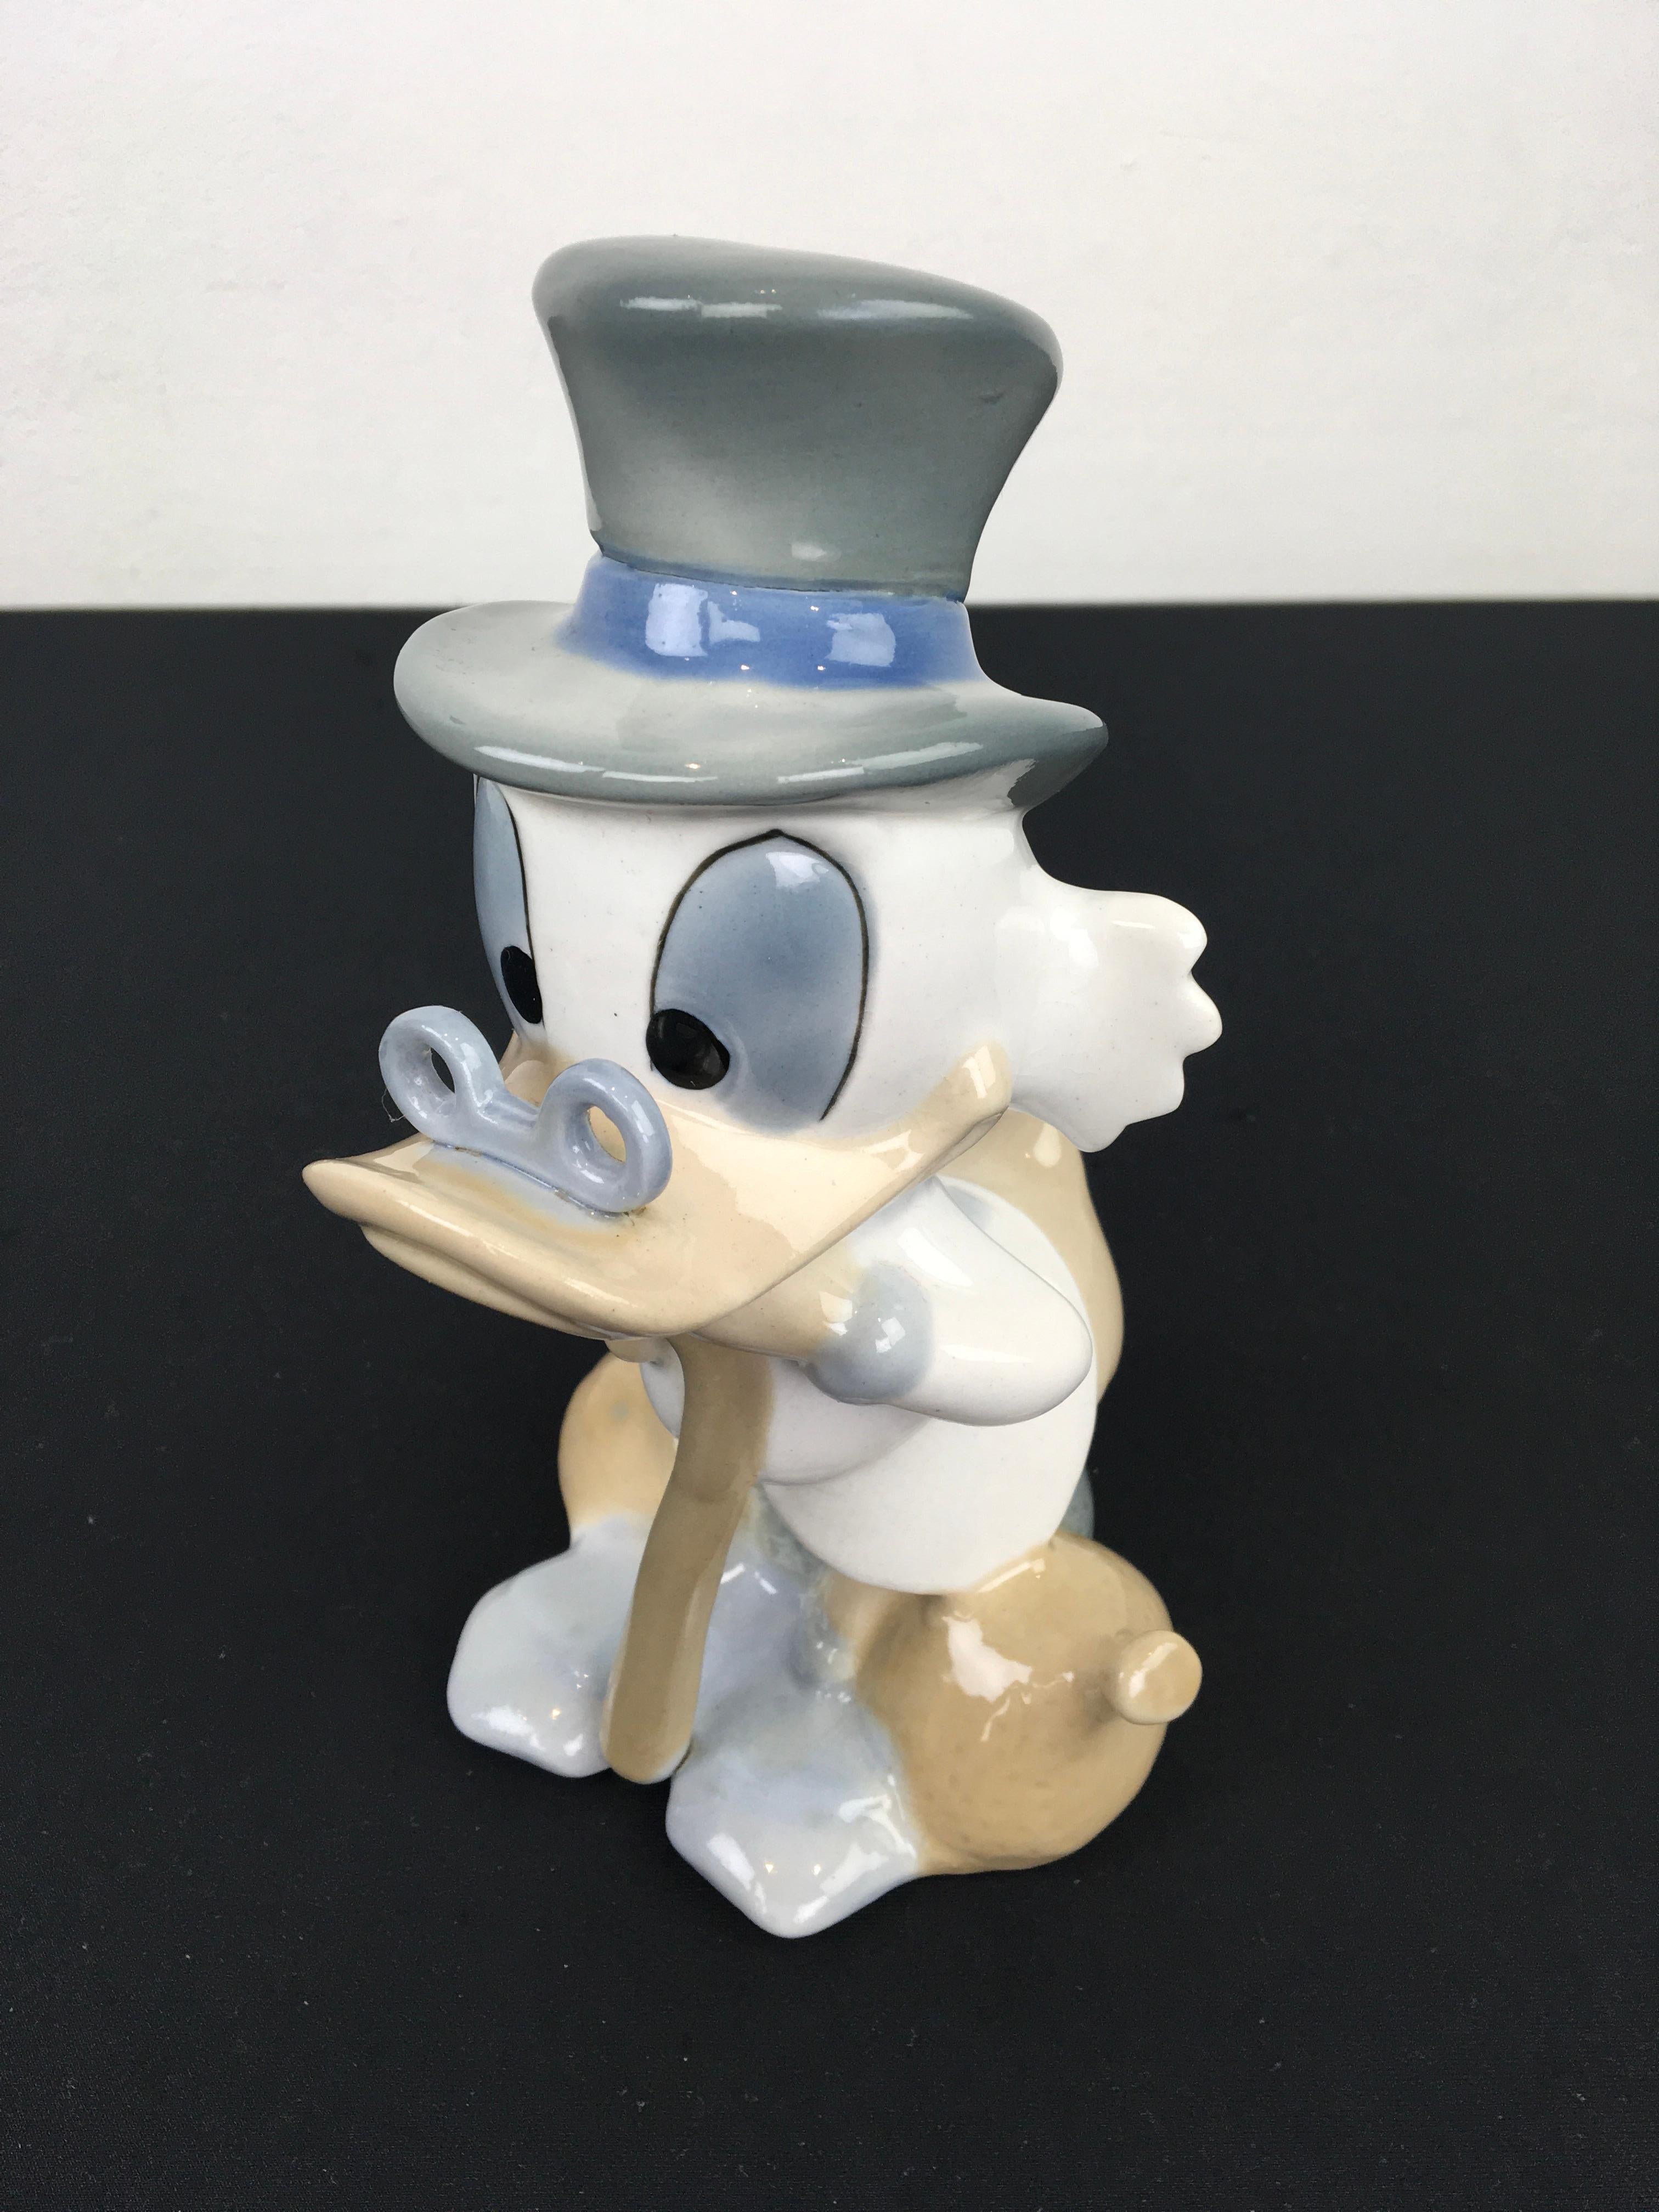 Porcelain Scrooge Mc Duck Figurine. 
A vintage glazed porcelain sculpture Made in Spain circa 1960 - 1980. 
Has stamps under. 
Disney character - Scrooge Mc Duck  - Dagobert Duck - Donald Duck. 
In beautiful colors blue - beige and white with the